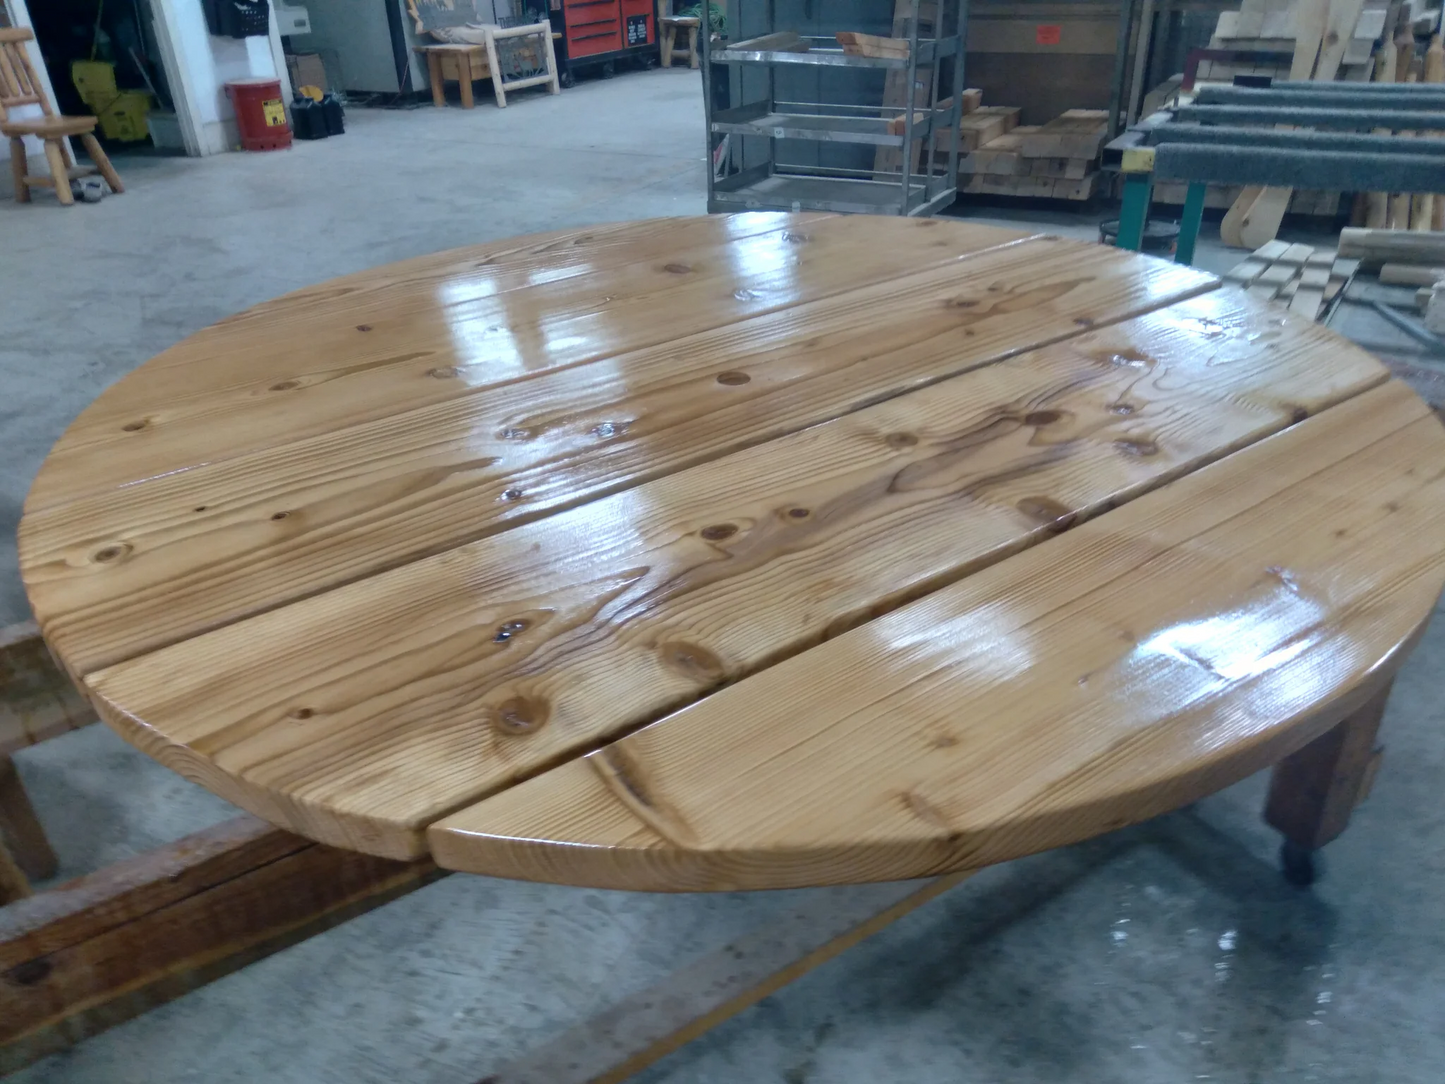 Moon Valley Rustic Cedar 56 inch Round Picnic Table (With Attached Benches) - LEAD TIME TO SHIP: (UNFINISHED - 2 WEEKS) - (FINISHED - 4 WEEKS)